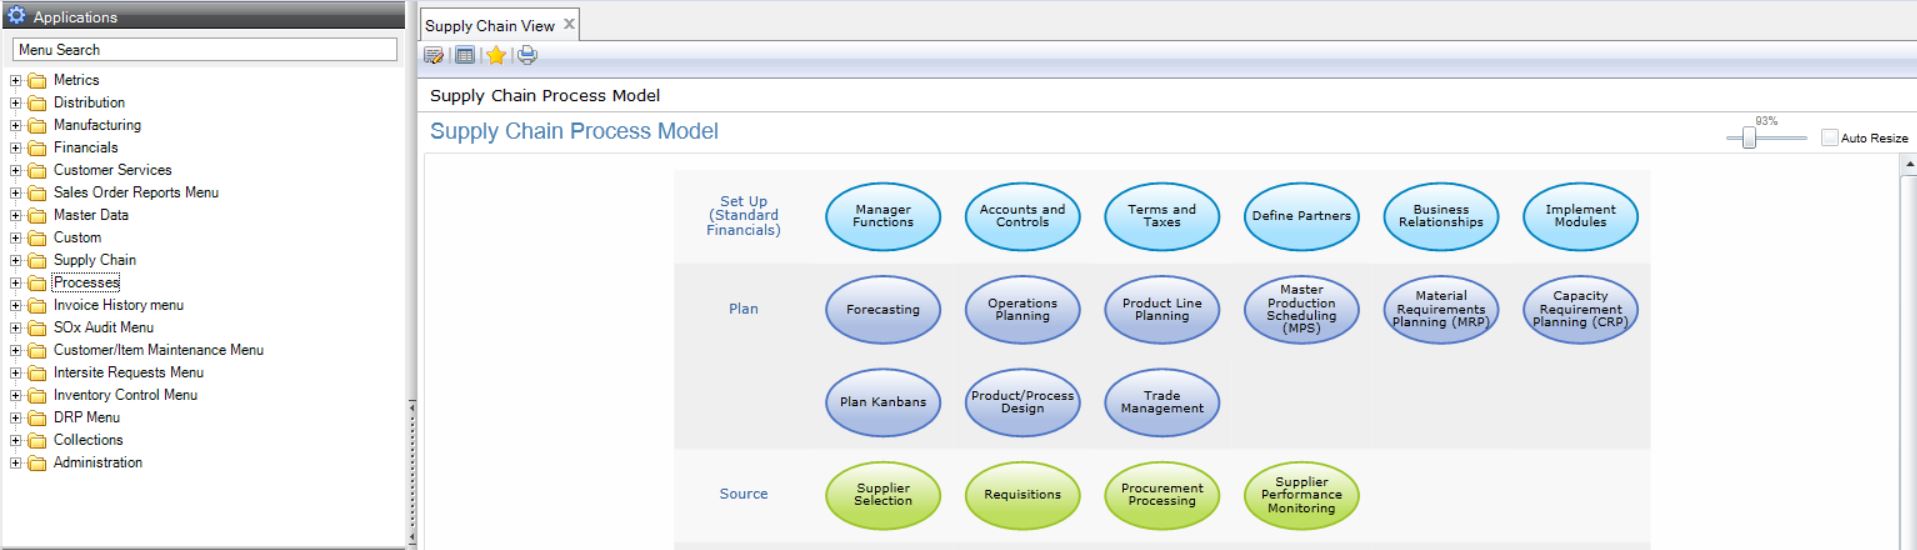 Enabling the Effective QAD user: Process Maps